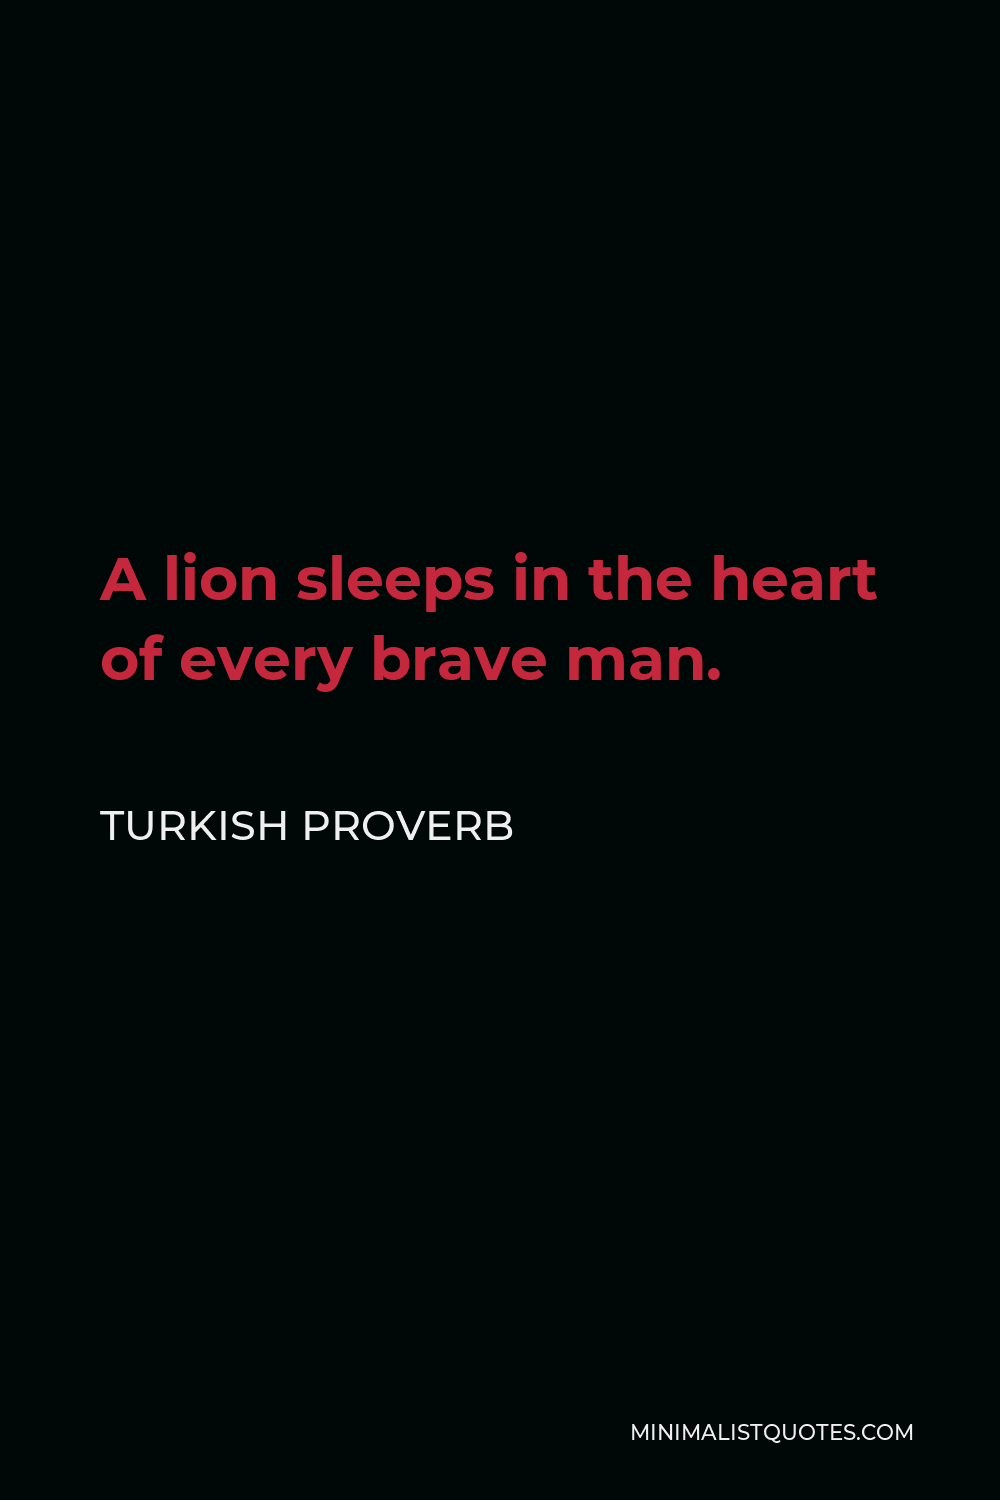 Turkish Proverb Quote - A lion sleeps in the heart of every brave man.